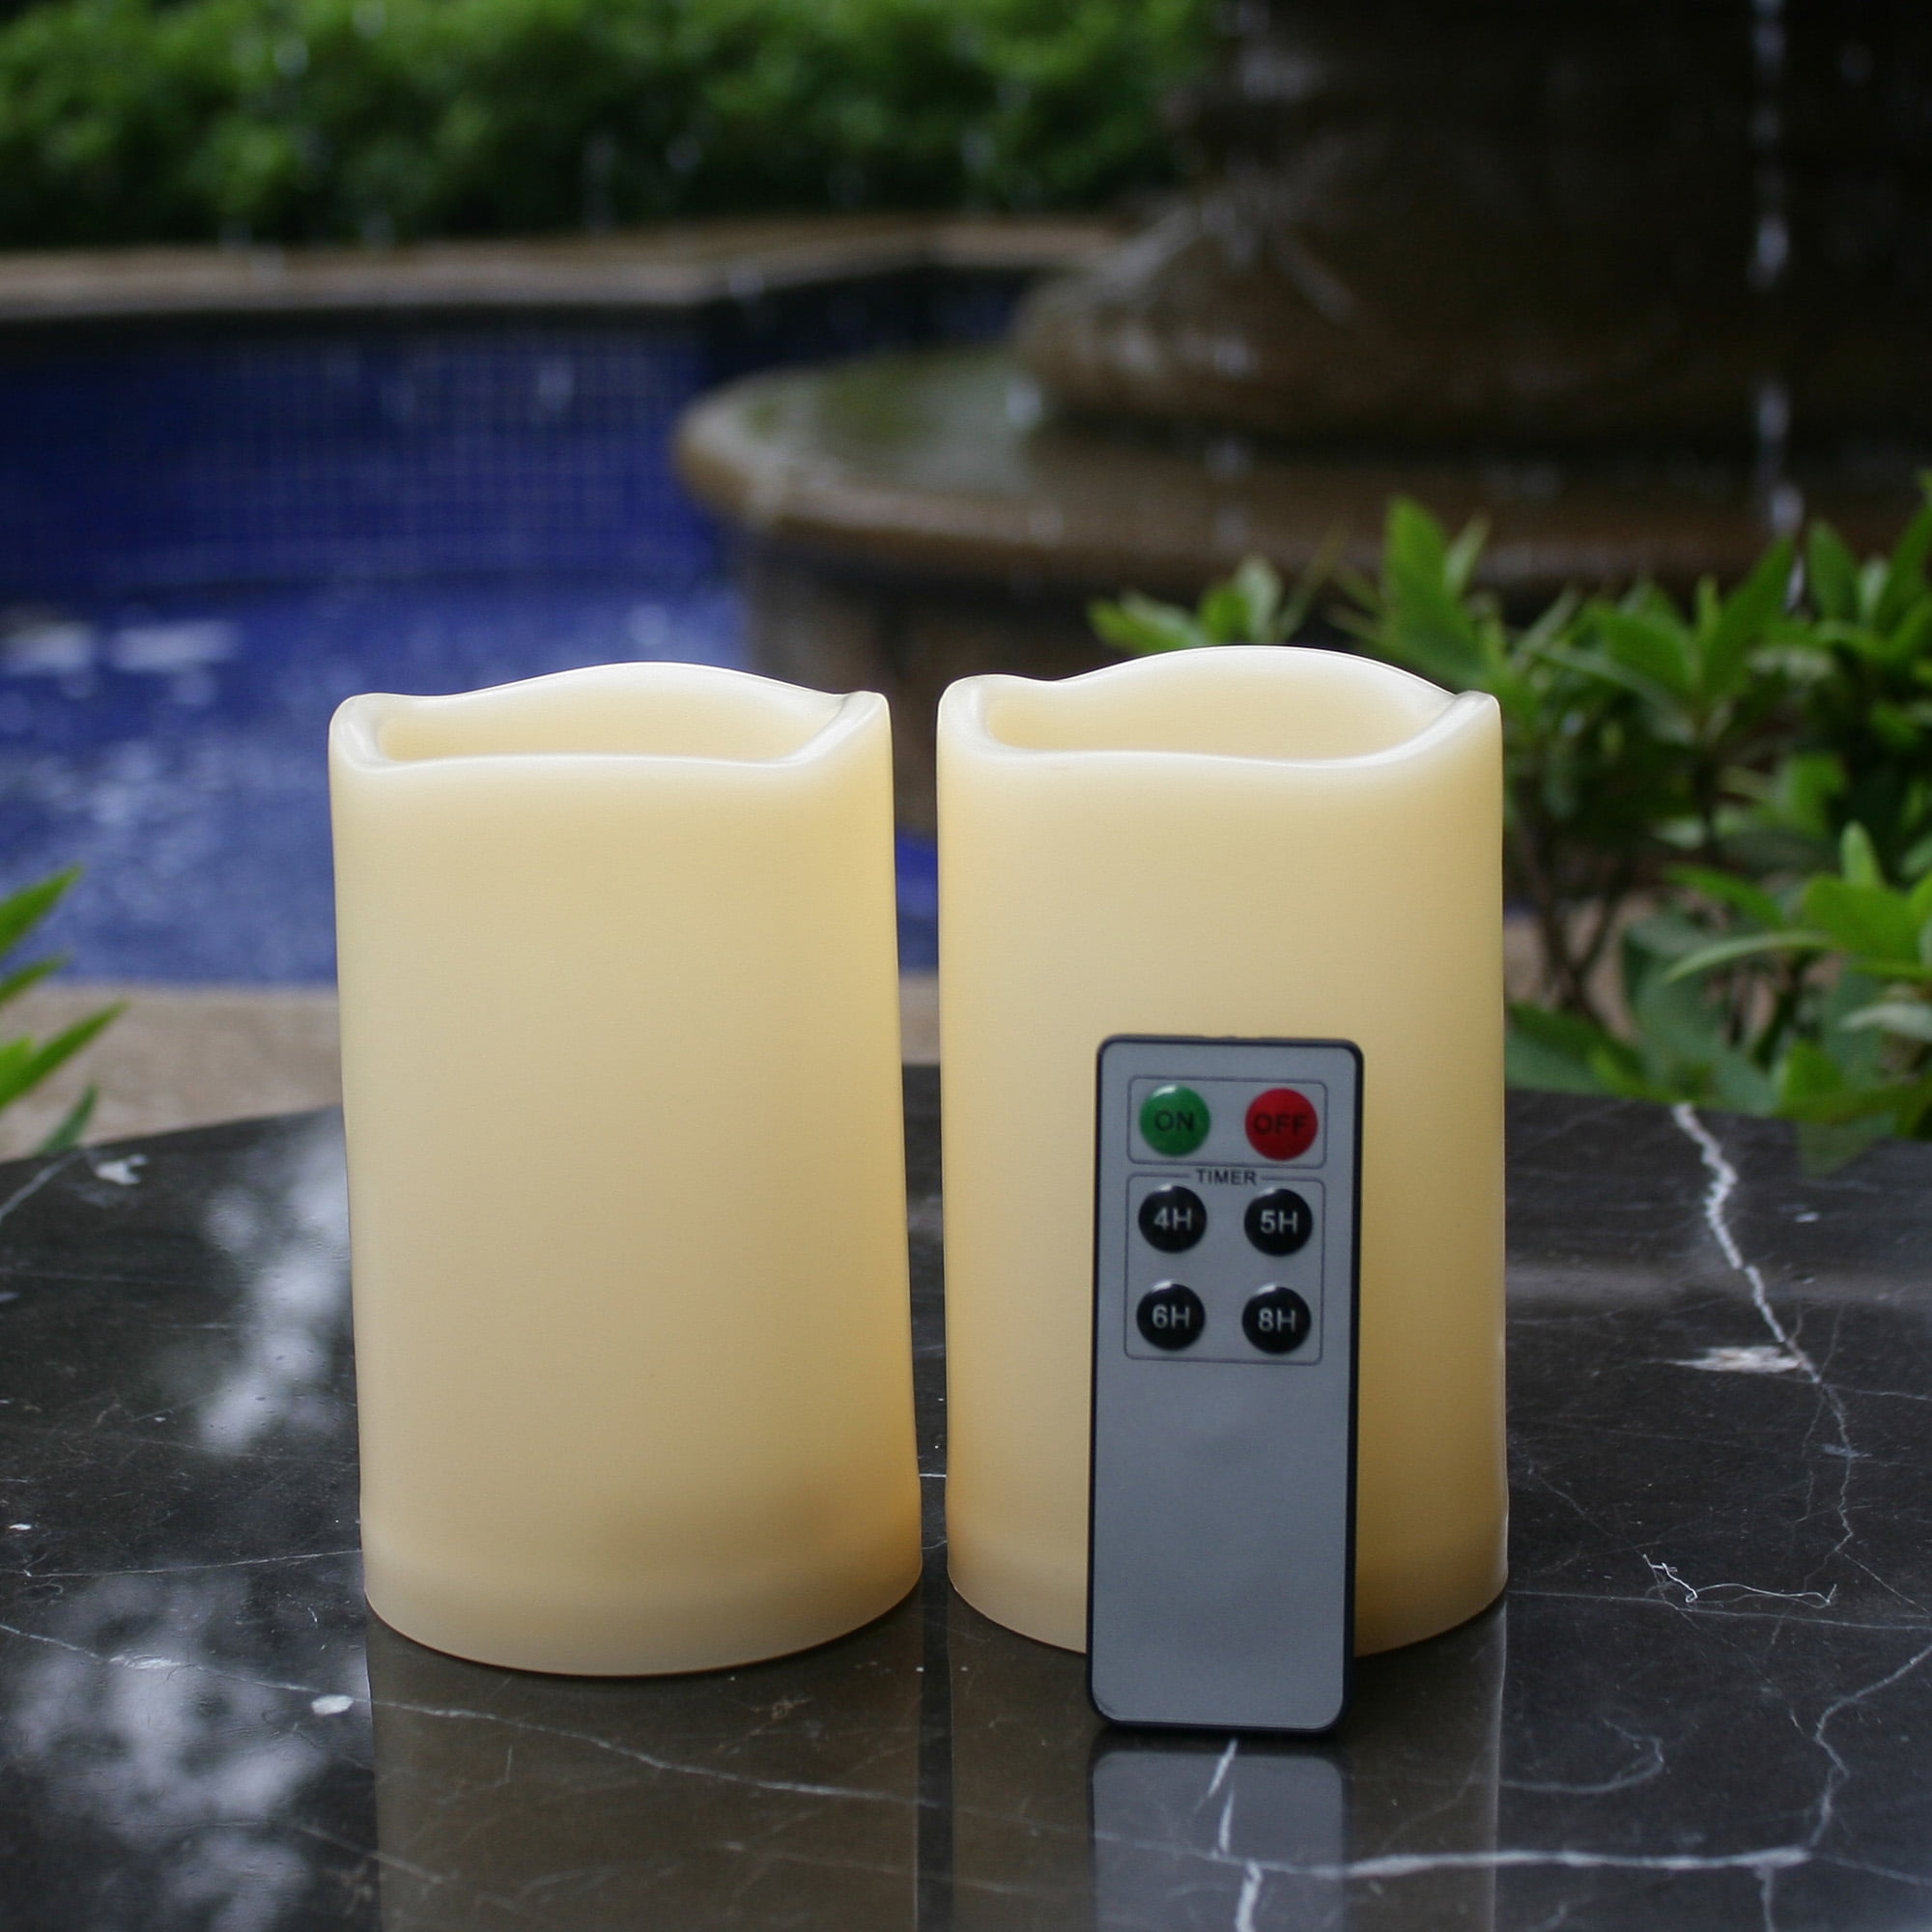 Battery Operated Large Flickering LED Pillar Candles for Indoor Outdoor Lanterns Won’t melt Long-Lasting White, Set of 2, 8” x 4” GenSwin Waterproof Outdoor Flameless Candles with Remote Timer